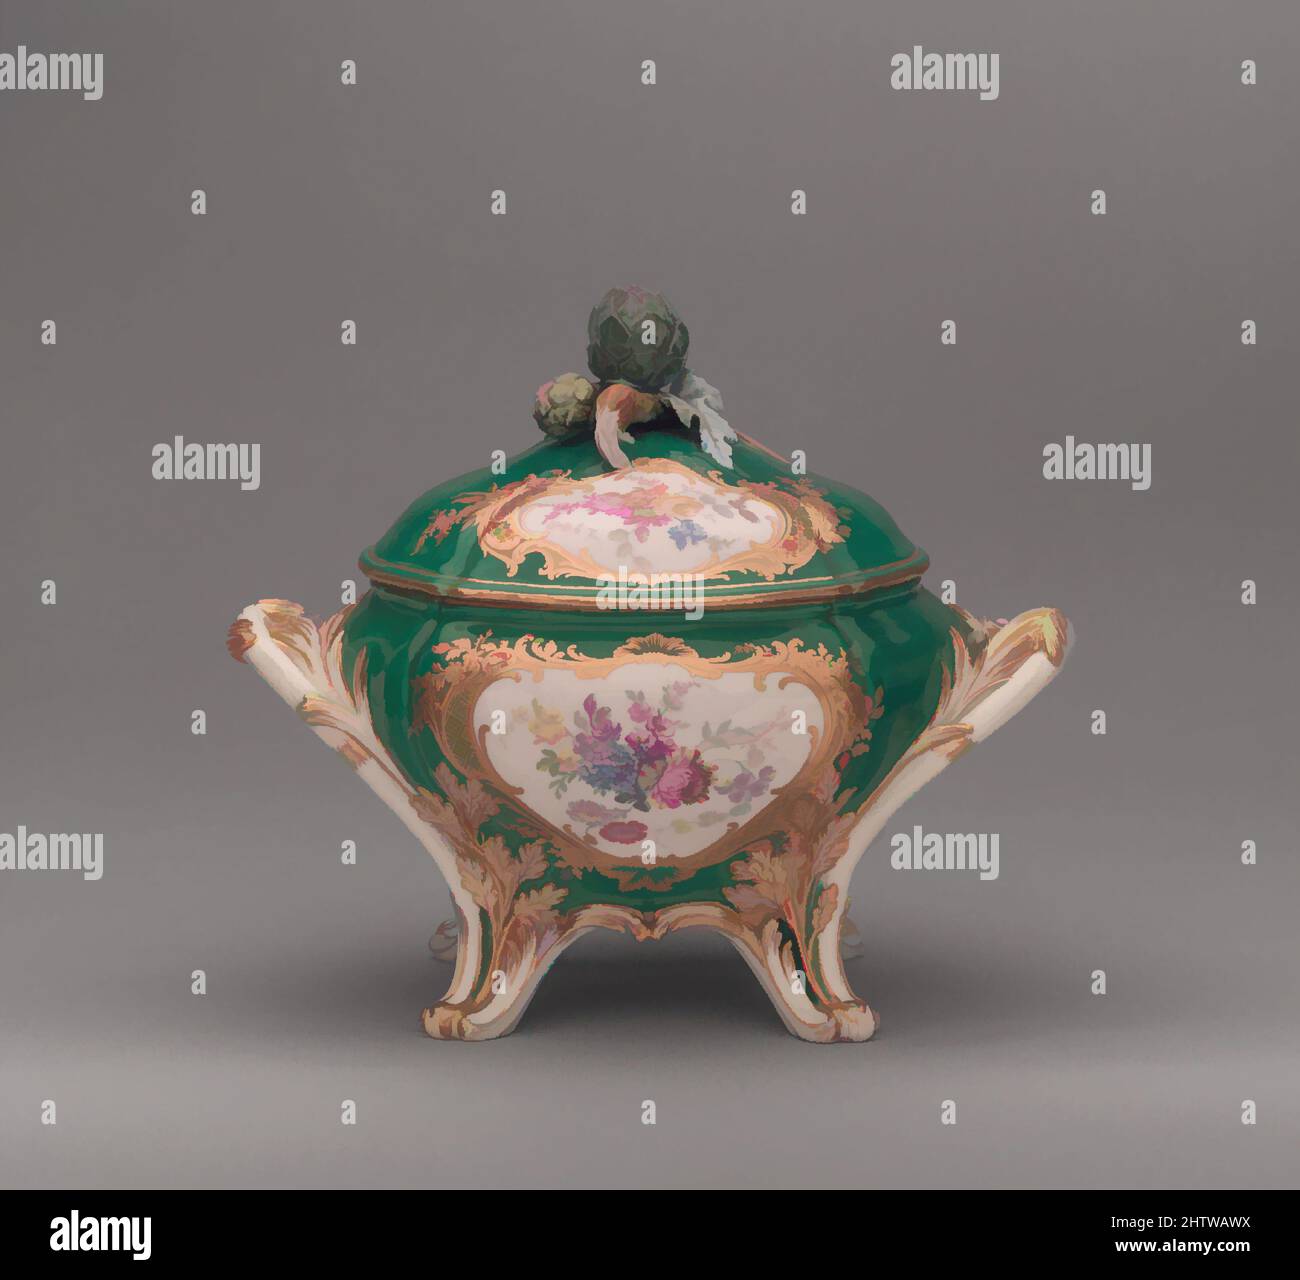 Art inspired by Tureen, 1757–58, French, Sèvres, Soft-paste porcelain, Overall: 9 5/8 x 11 1/8 x 8 3/8 in. (24.4 x 28.3 x 21.3 cm), Ceramics-Porcelain, The curvilinear forms of this tureen and the asymmetry of the gilding reflect the characteristic features of the French rococo style, Classic works modernized by Artotop with a splash of modernity. Shapes, color and value, eye-catching visual impact on art. Emotions through freedom of artworks in a contemporary way. A timeless message pursuing a wildly creative new direction. Artists turning to the digital medium and creating the Artotop NFT Stock Photo